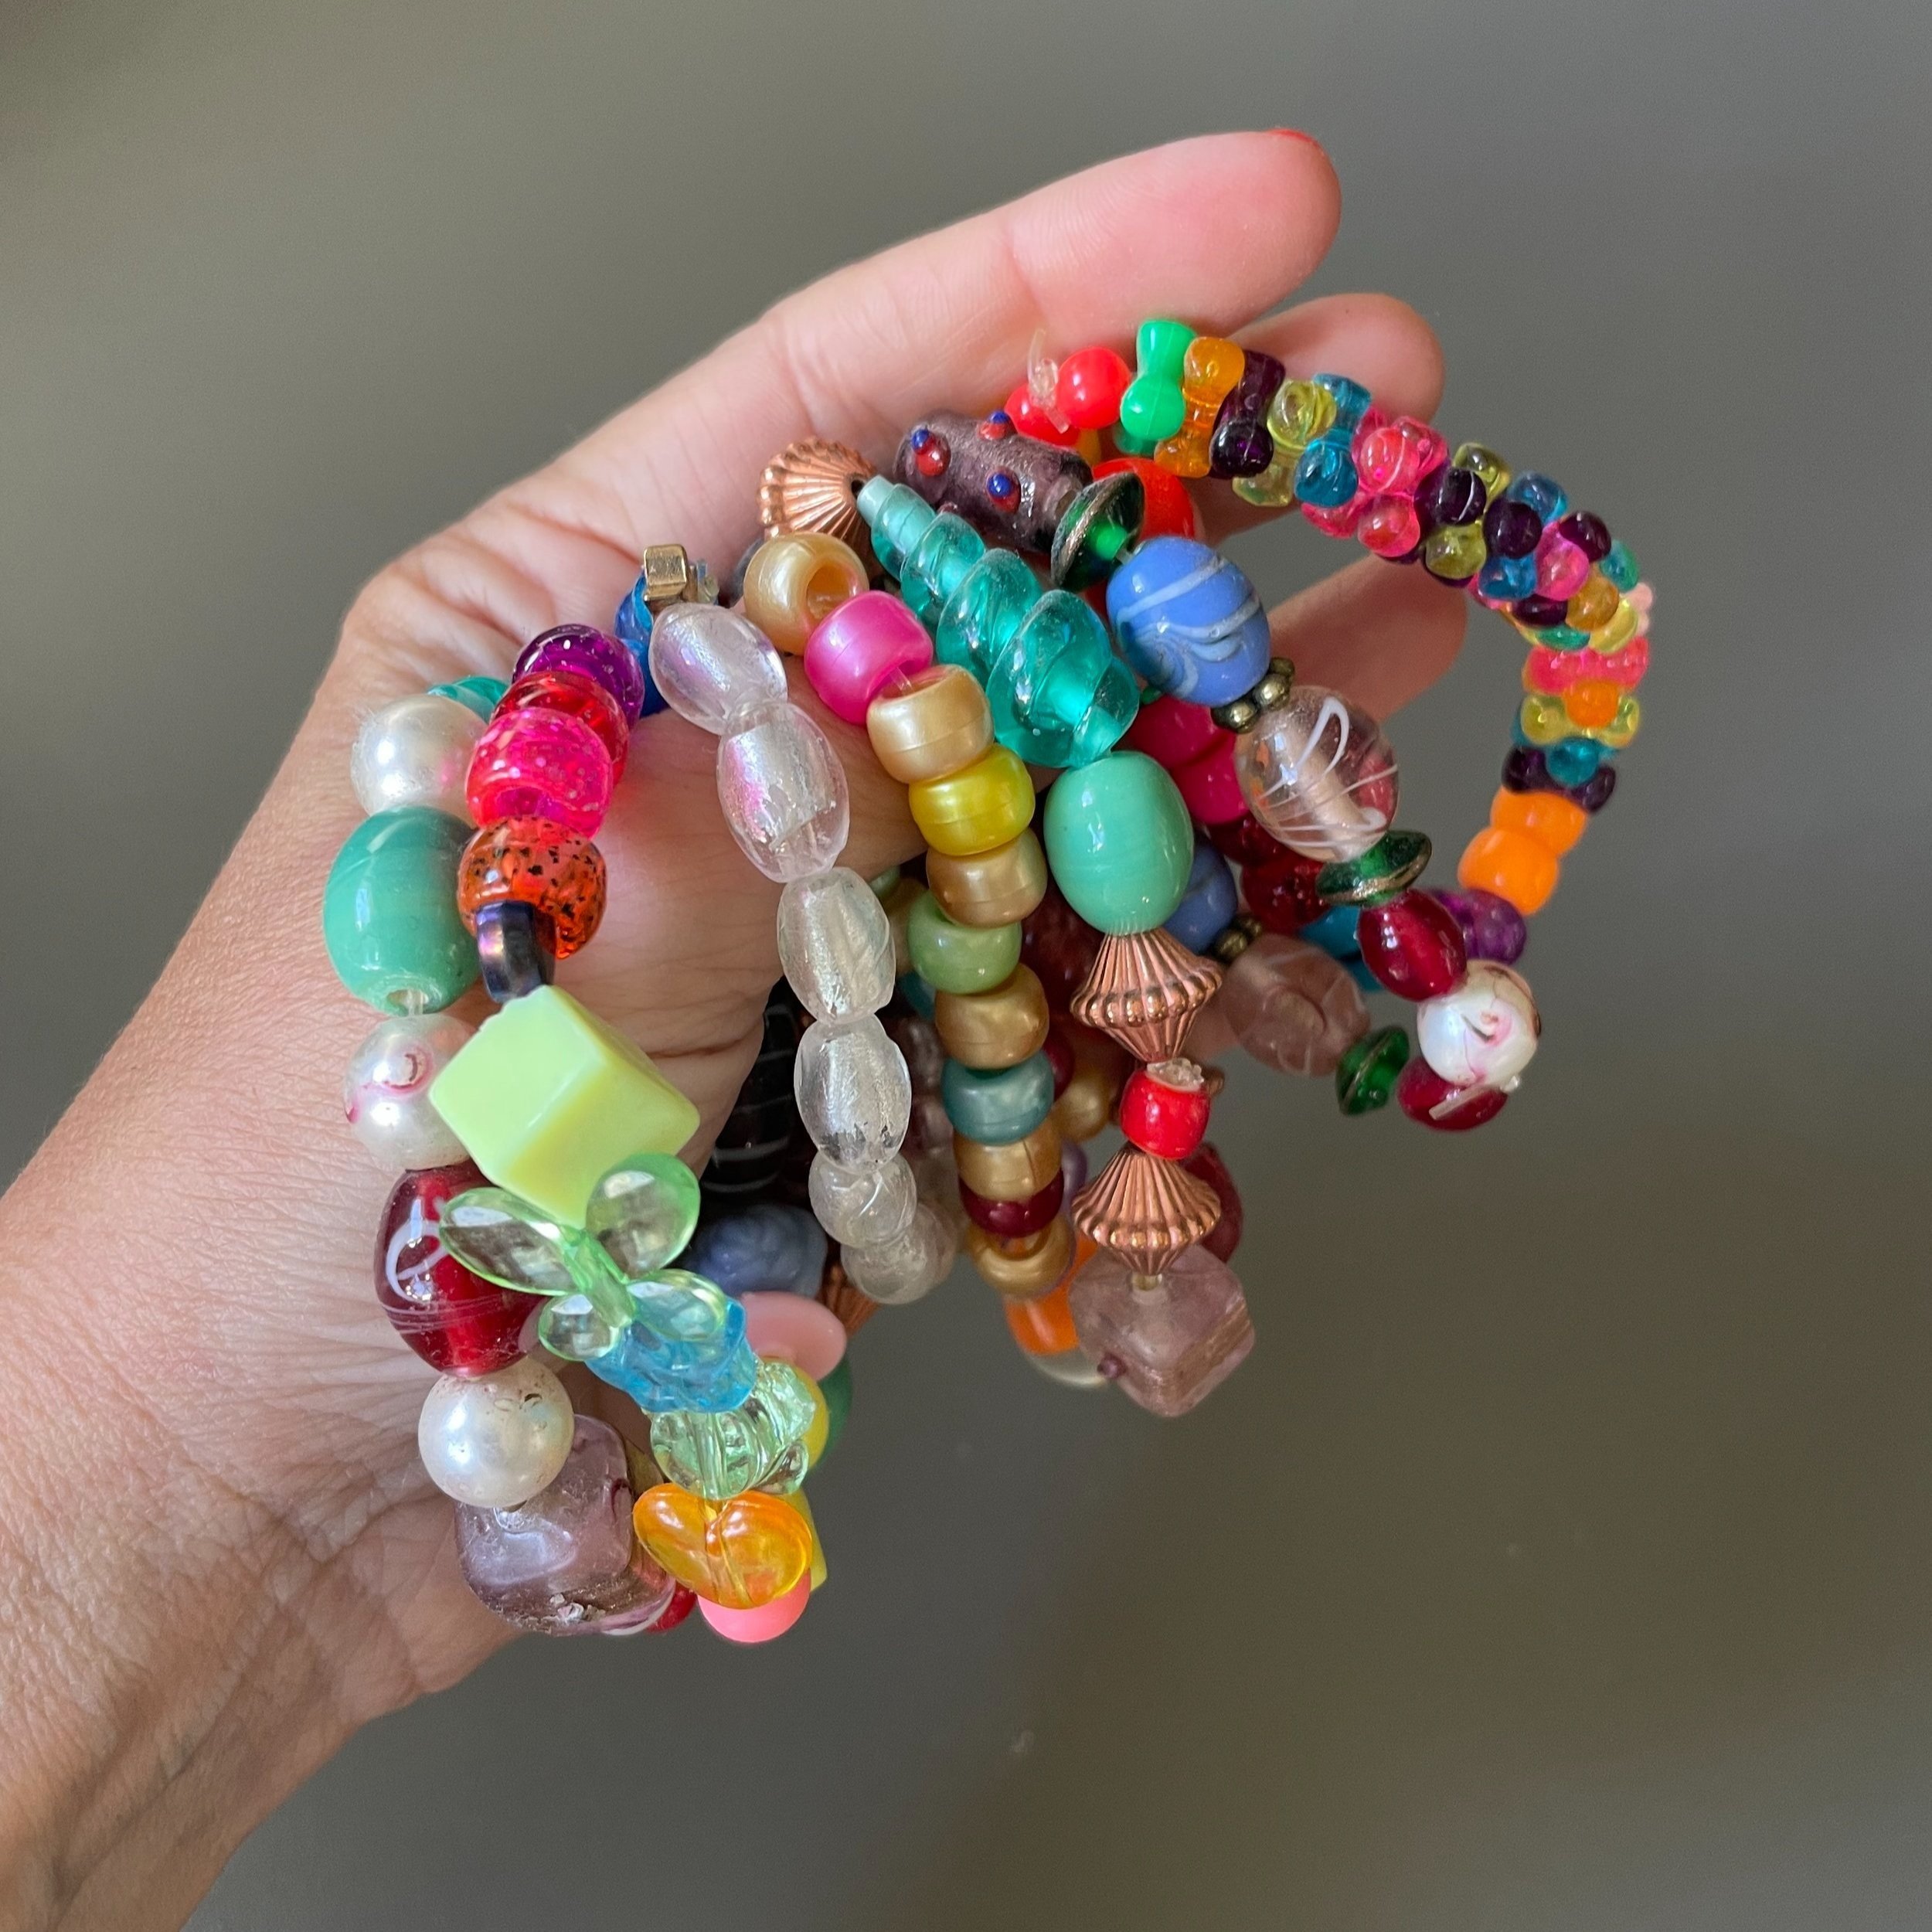 The best jewelry gift Randi has received: all the beaded jewelry her daughter makes for her